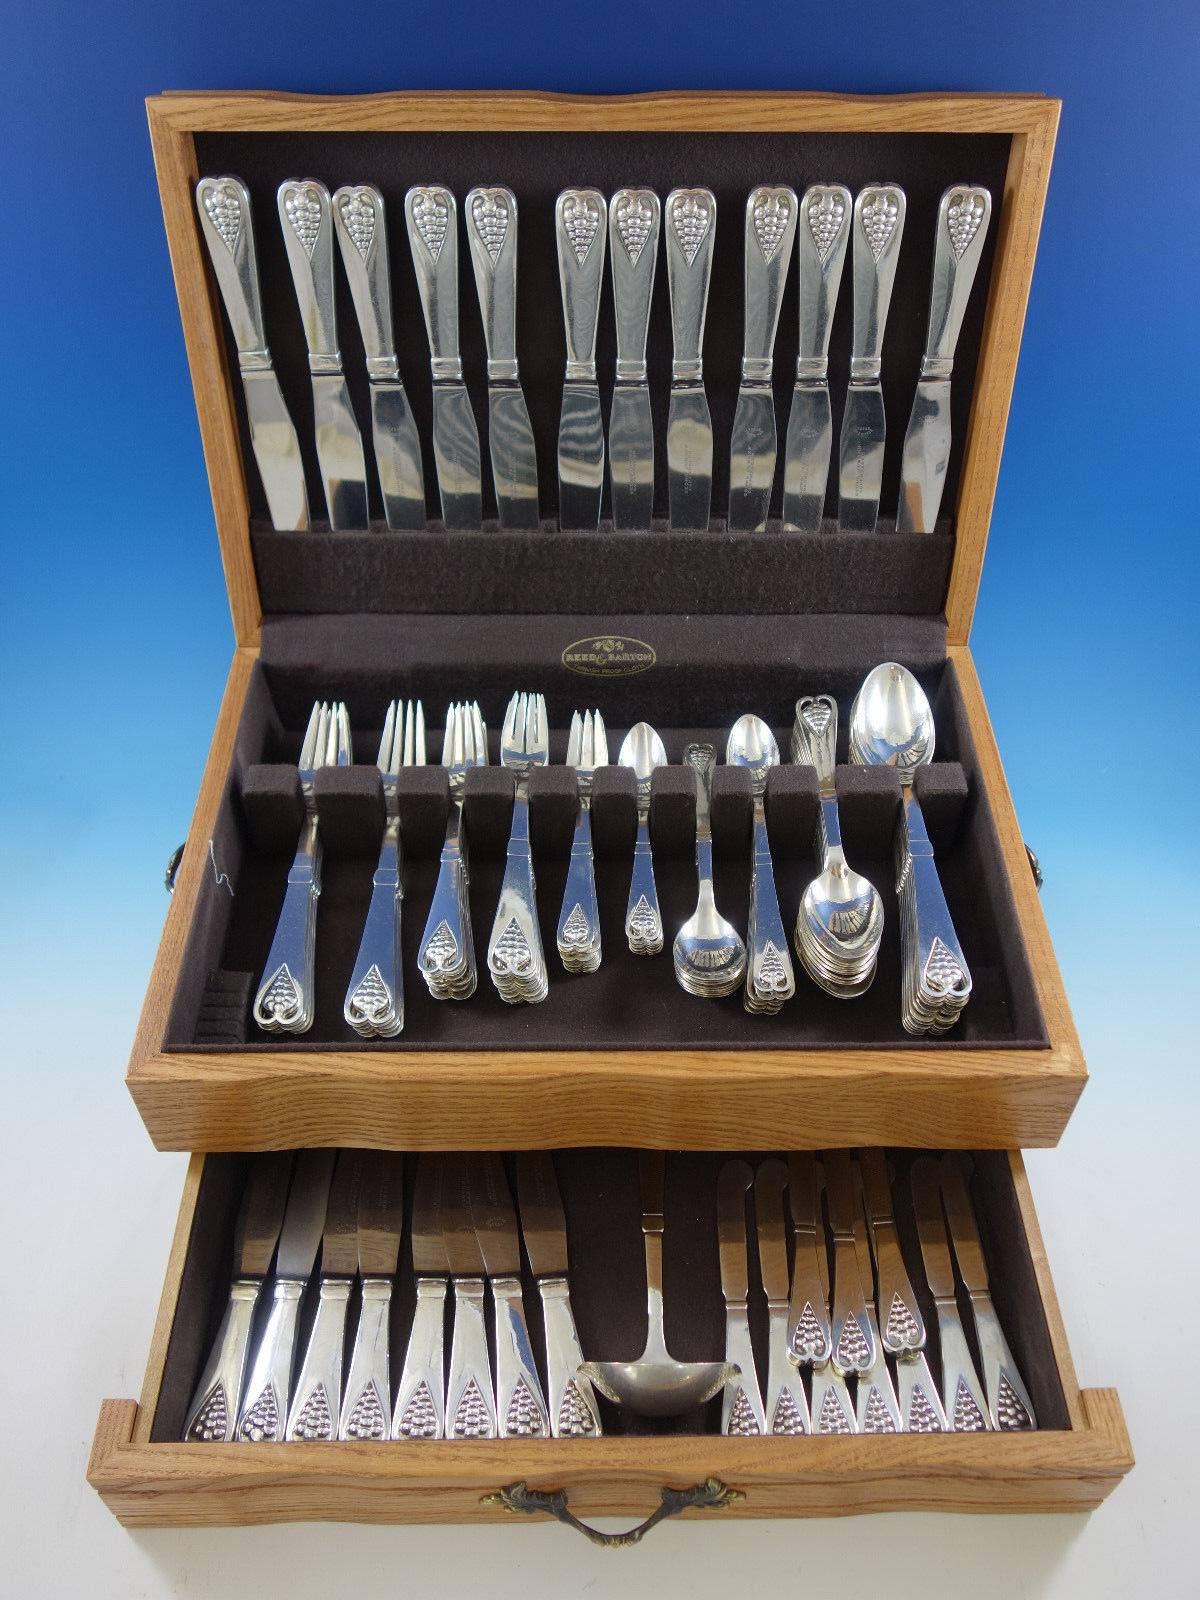 Rare handmade ornamental #19 by Georg Jensen sterling silver flatware set with superb pierced Art Nouveau grapes motif - 129 pieces. Early 